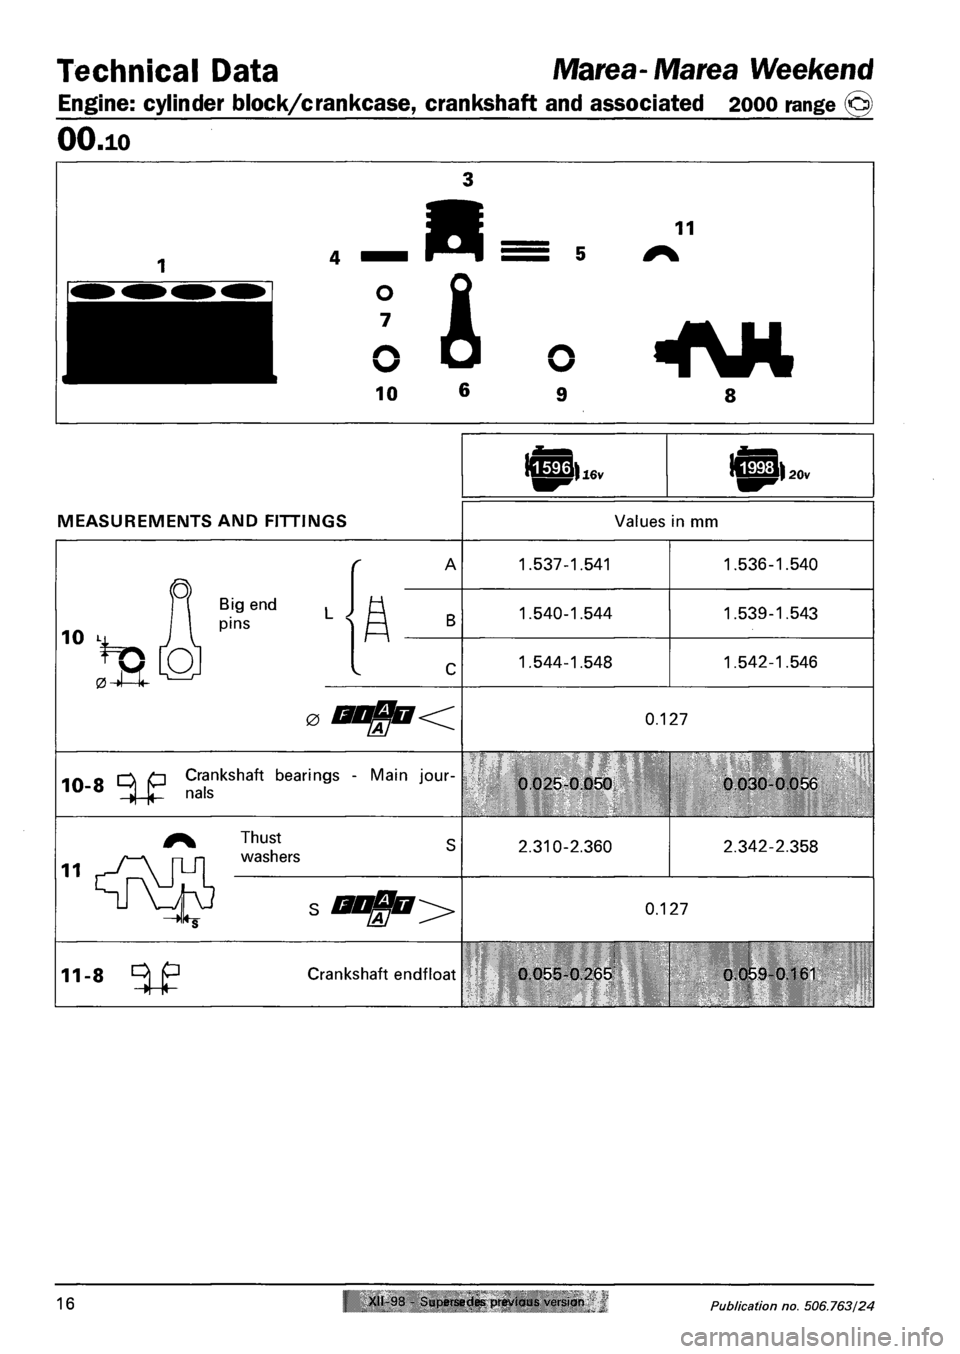 FIAT MAREA 2001 1.G User Guide Technical Data Marea- Marea Weekend 
Engine: cylinder block/crankcase, crankshaft and associated 2000 range @ 
OO.io 
MEASUREMENTS AND FITTINGS Values in mm 
10 K 
*P [O 
Big end 
pins 
1.537-1.541 
1